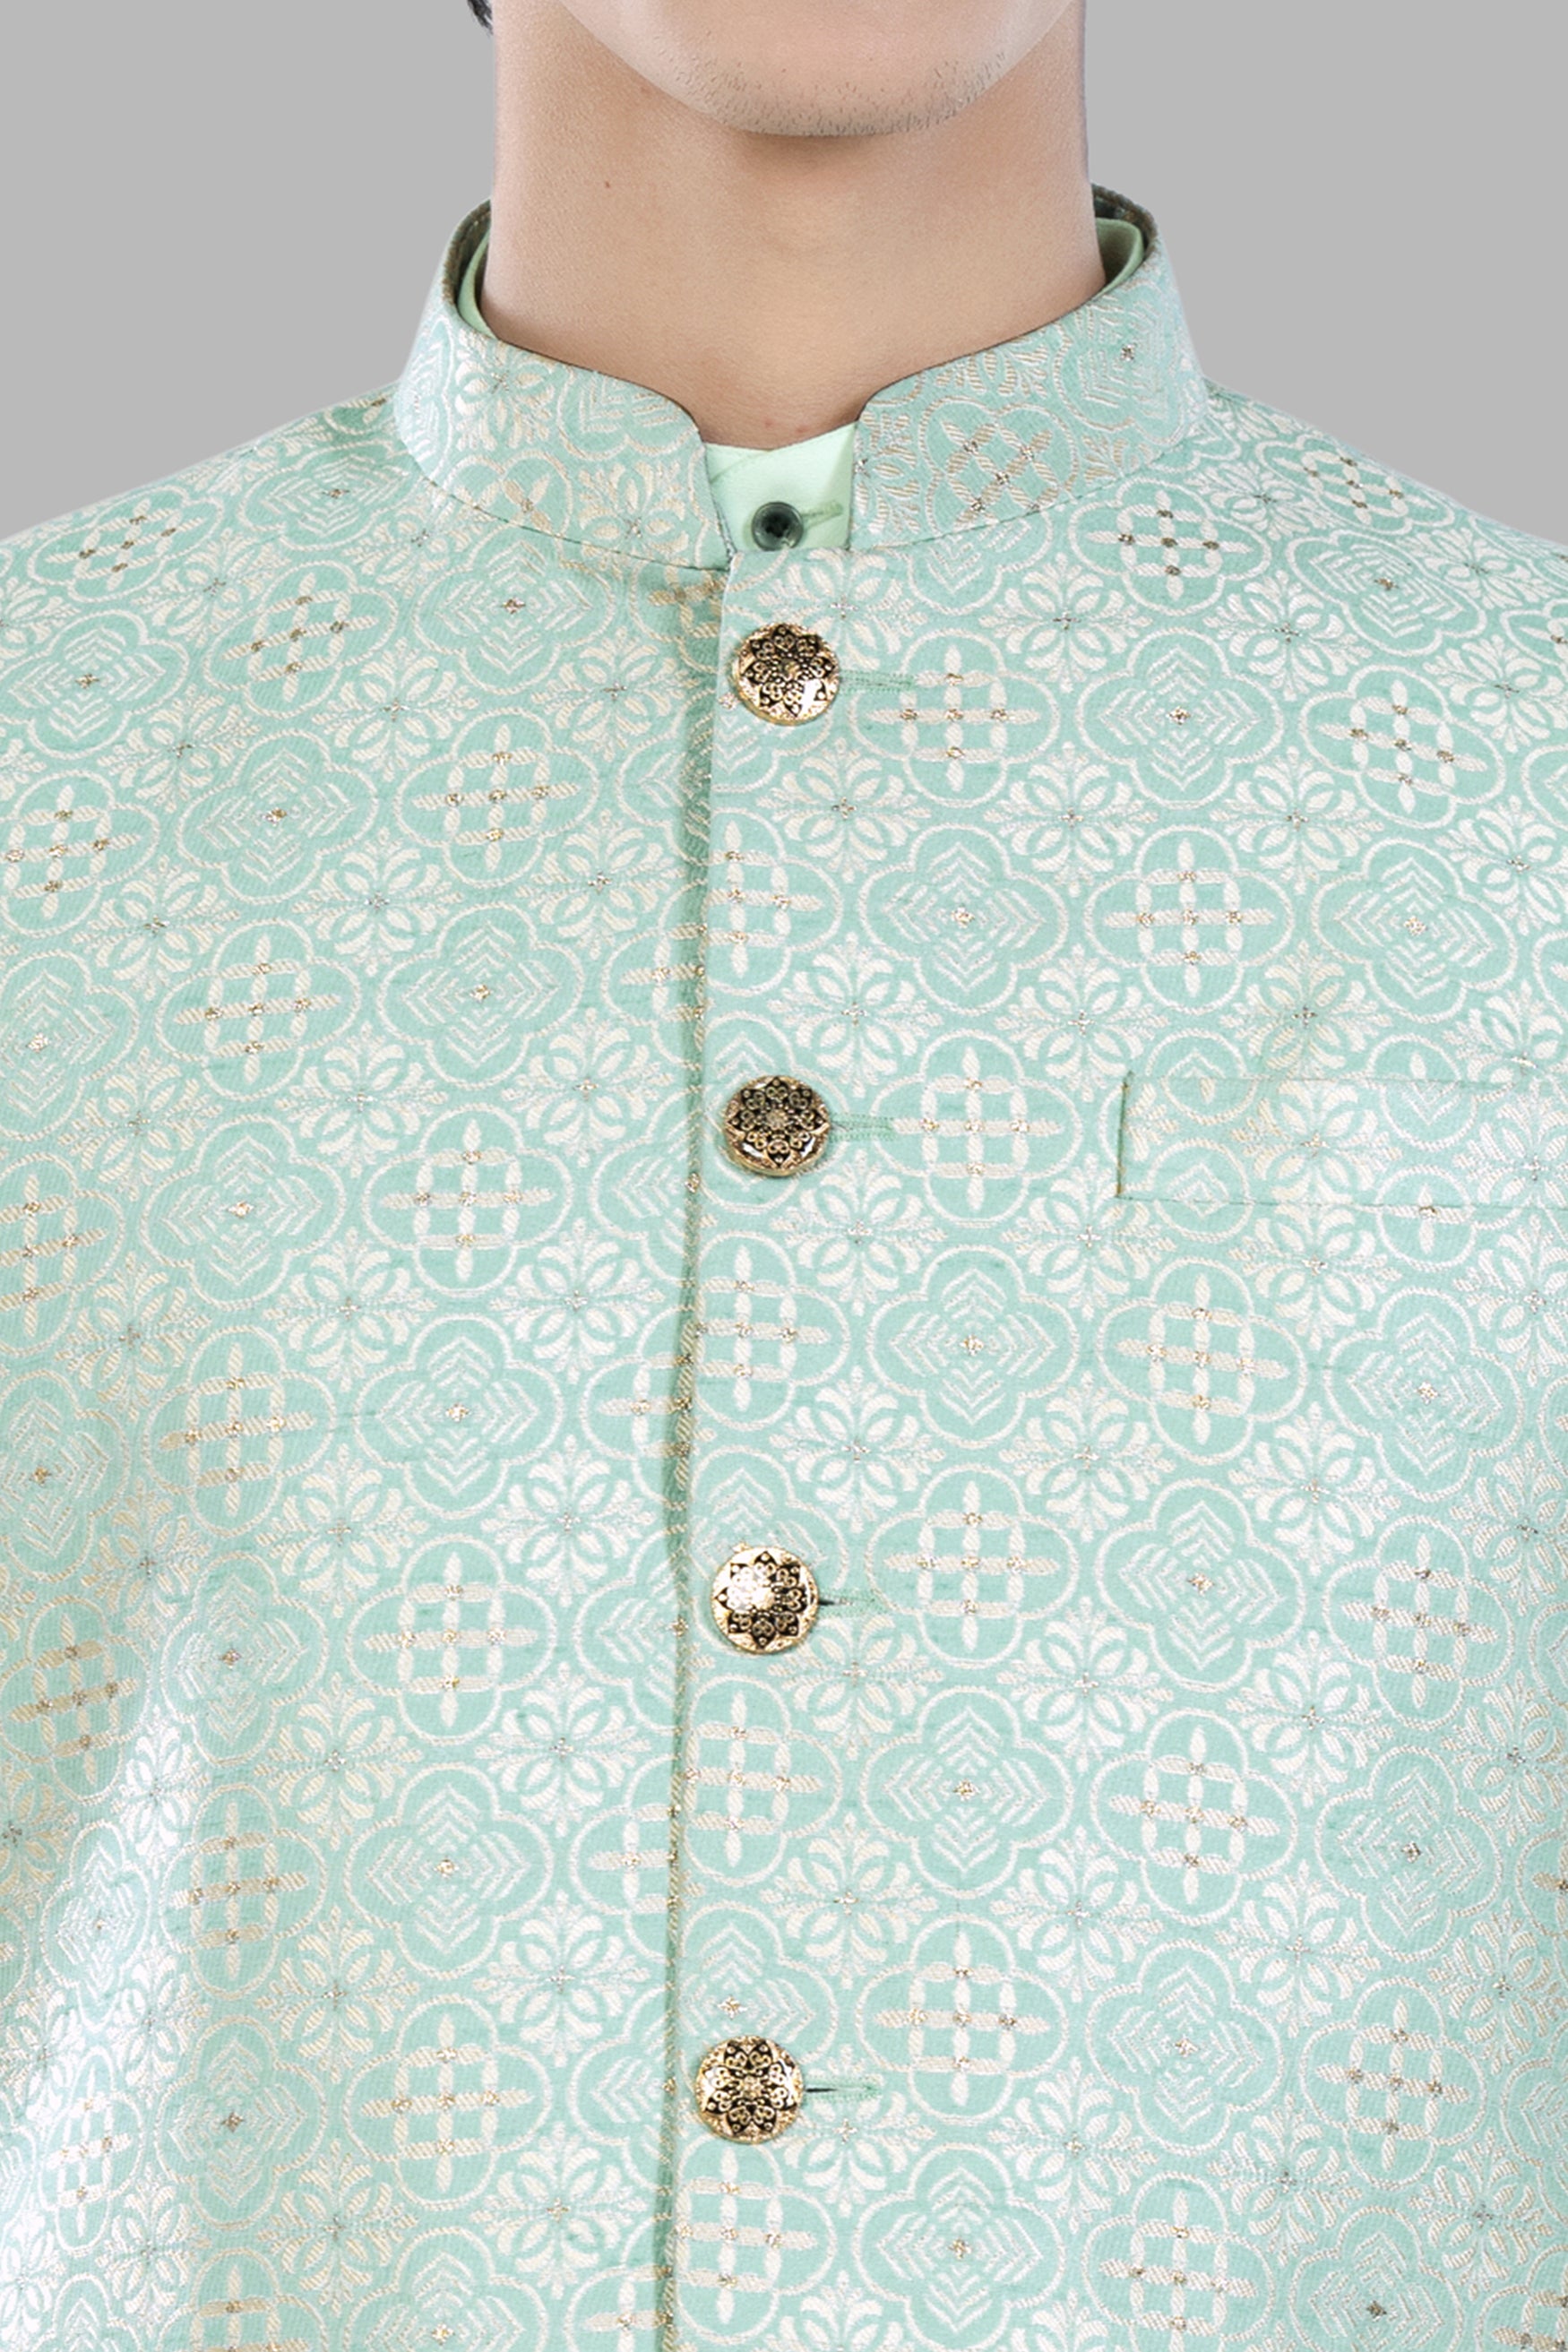 Opal Green and White Moroccan Jacquard Textured Designer Nehru Jacket WC3456-36,  WC3456-38,  WC3456-40,  WC3456-42,  WC3456-44,  WC3456-46,  WC3456-48,  WC3456-50,  WC3456-52,  WC3456-54,  WC3456-56,  WC3456-58,  WC3456-60